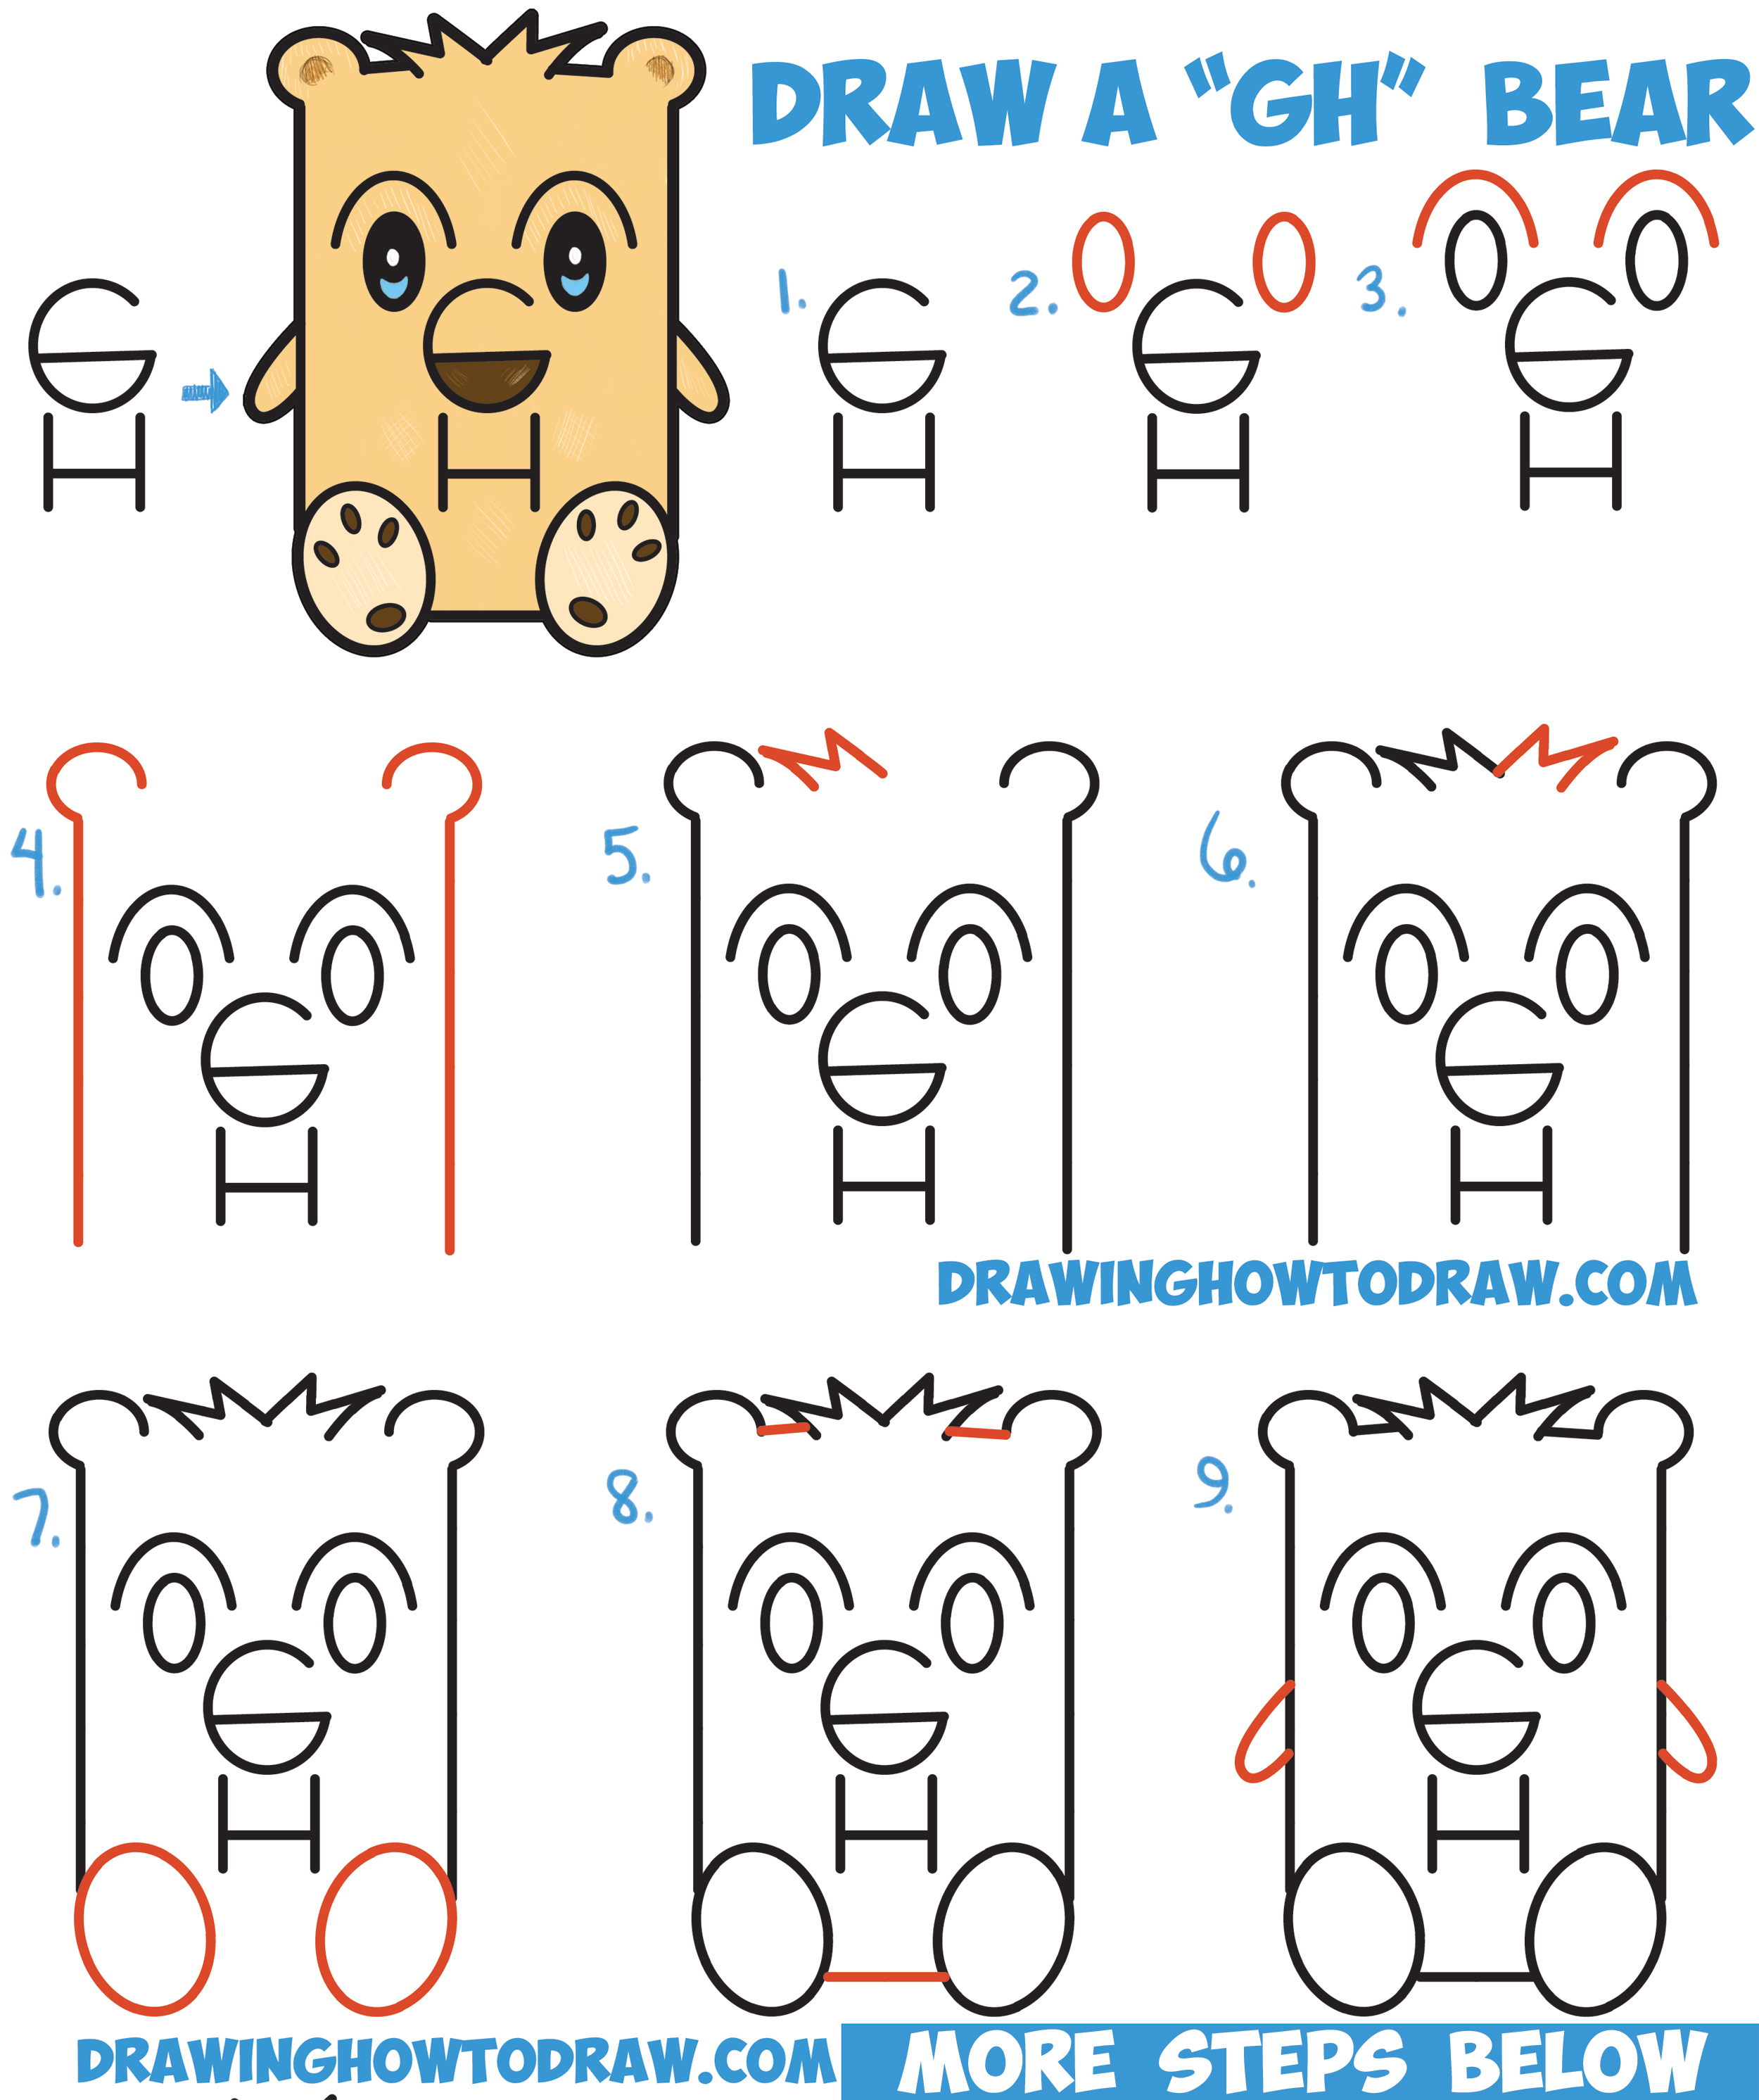 How to Draw a Cartoon Bear from Letters "GH" Easy Step by Step Drawing Tutorial for Kids and Beginners